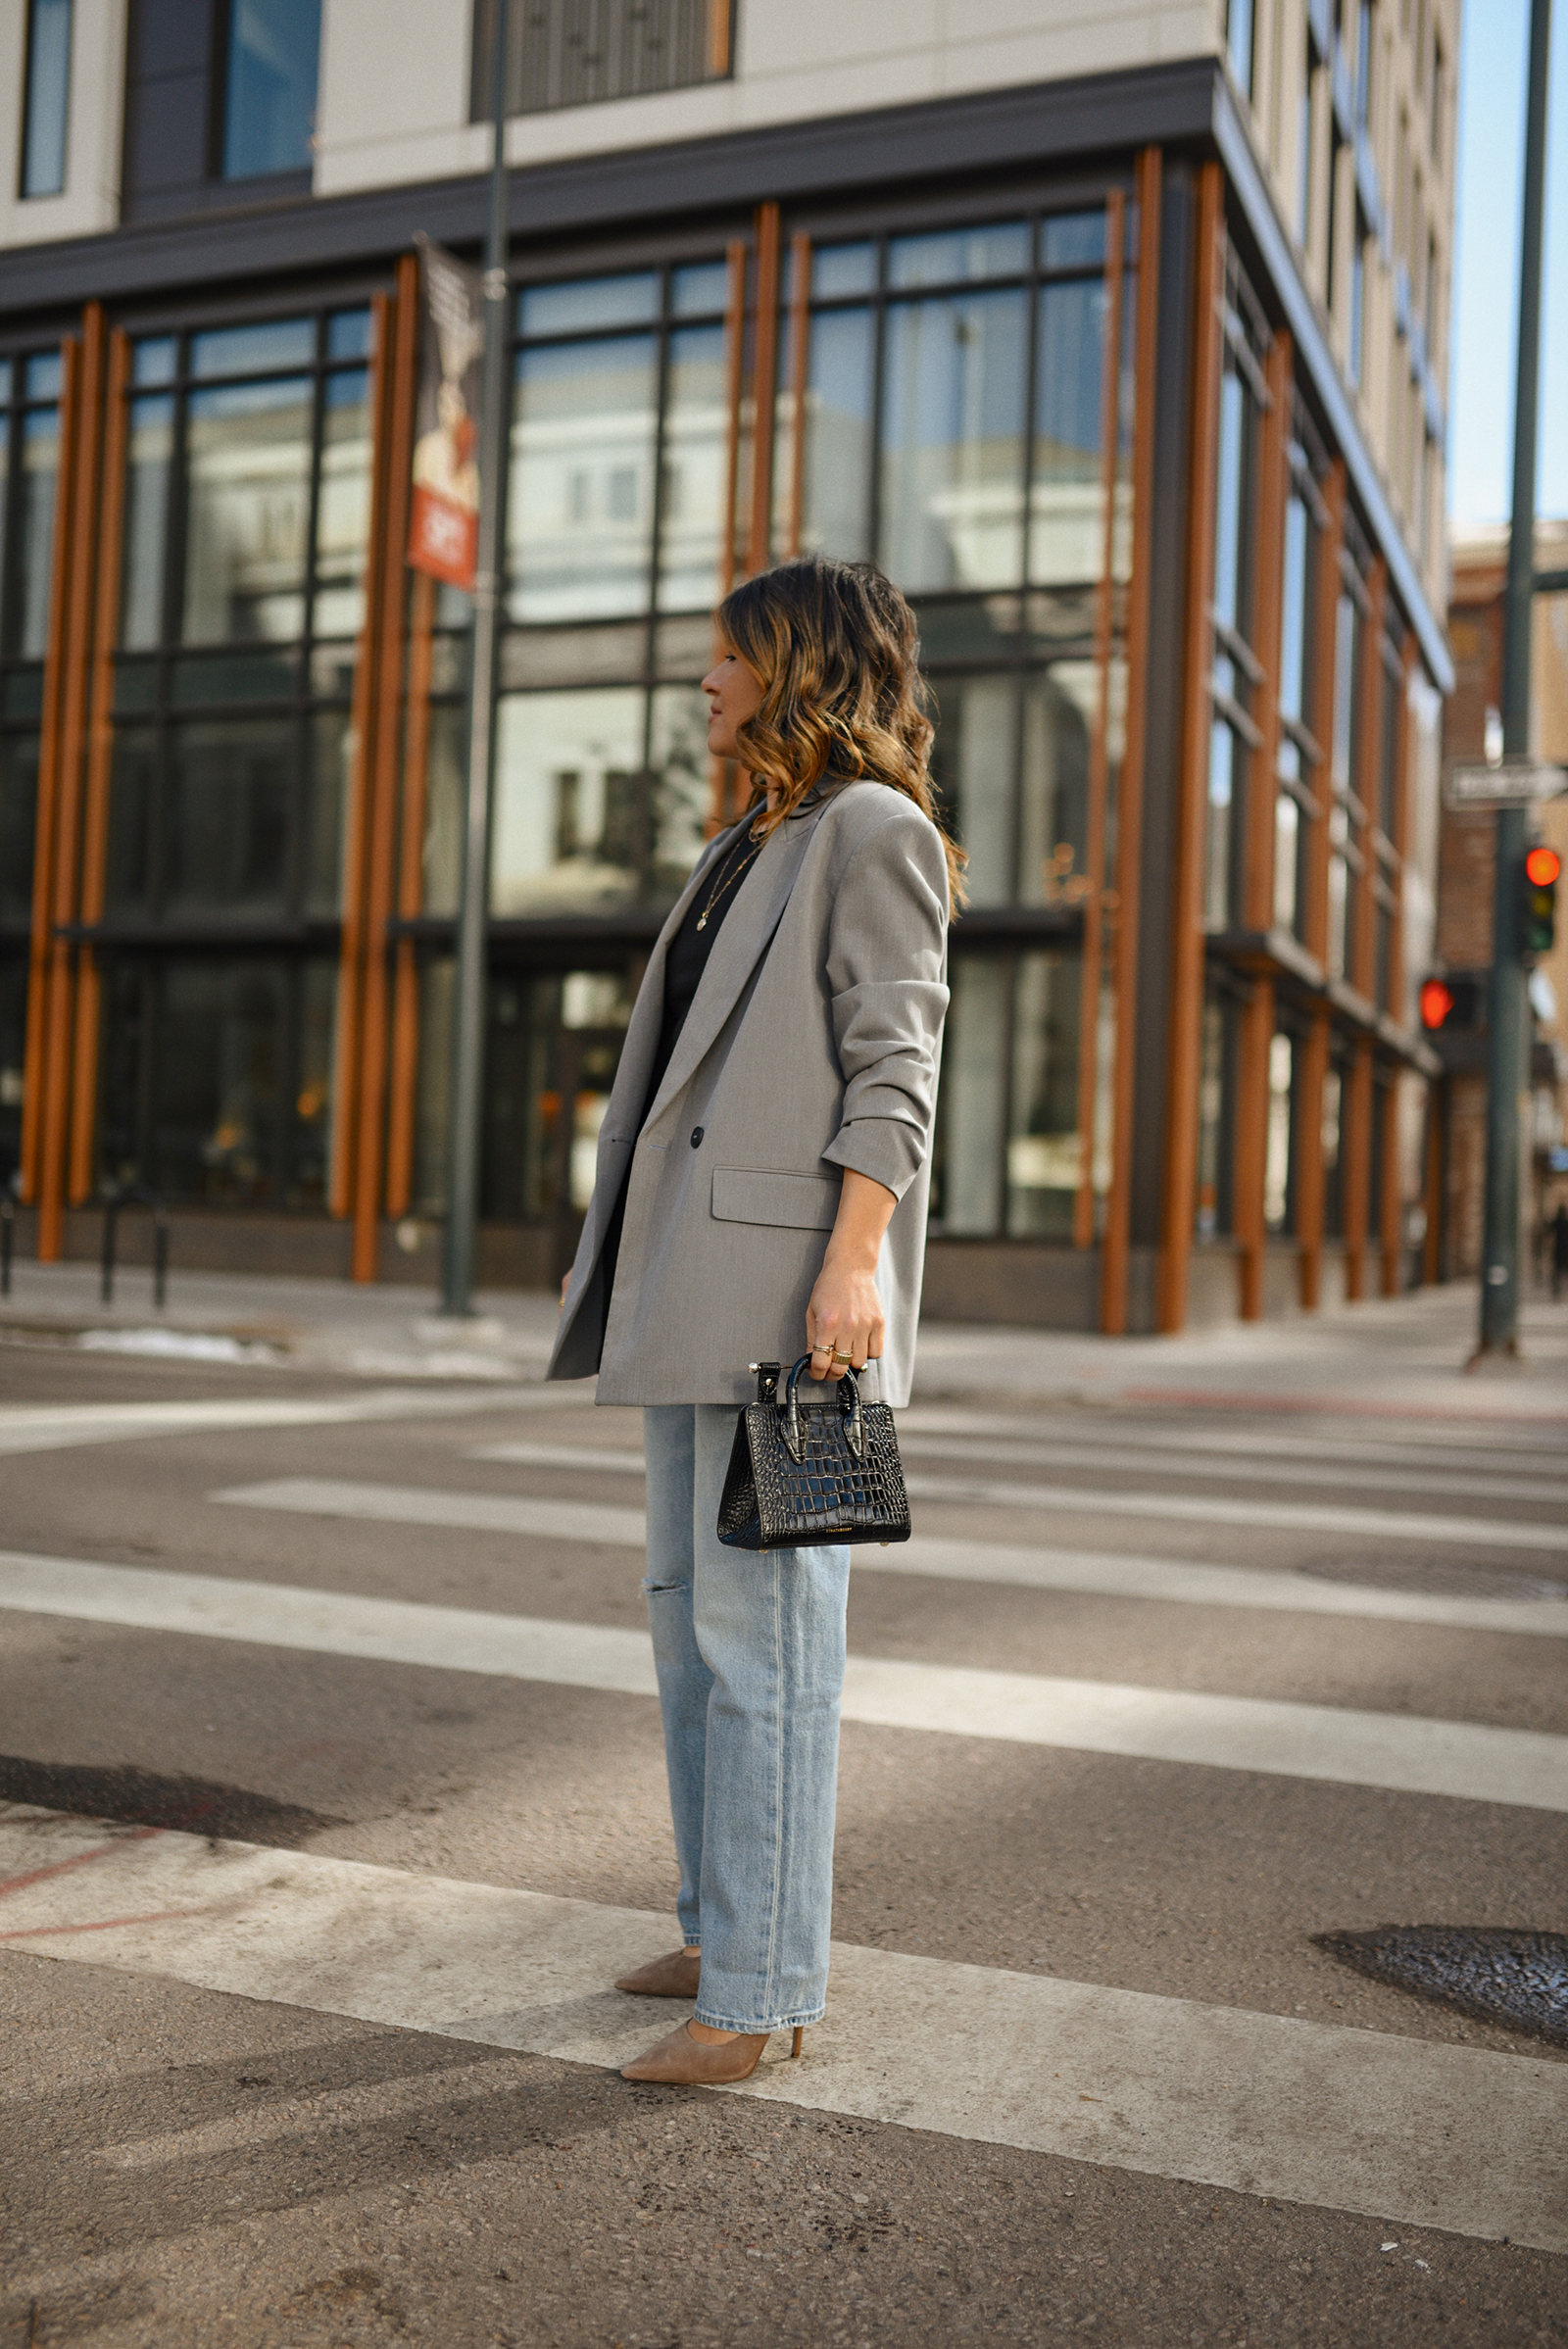 Carolina Hellal of CHIC TALK wearing a Hudson loose jeans and top, a Zara grey blazer, a Strathberry bag and black pumps